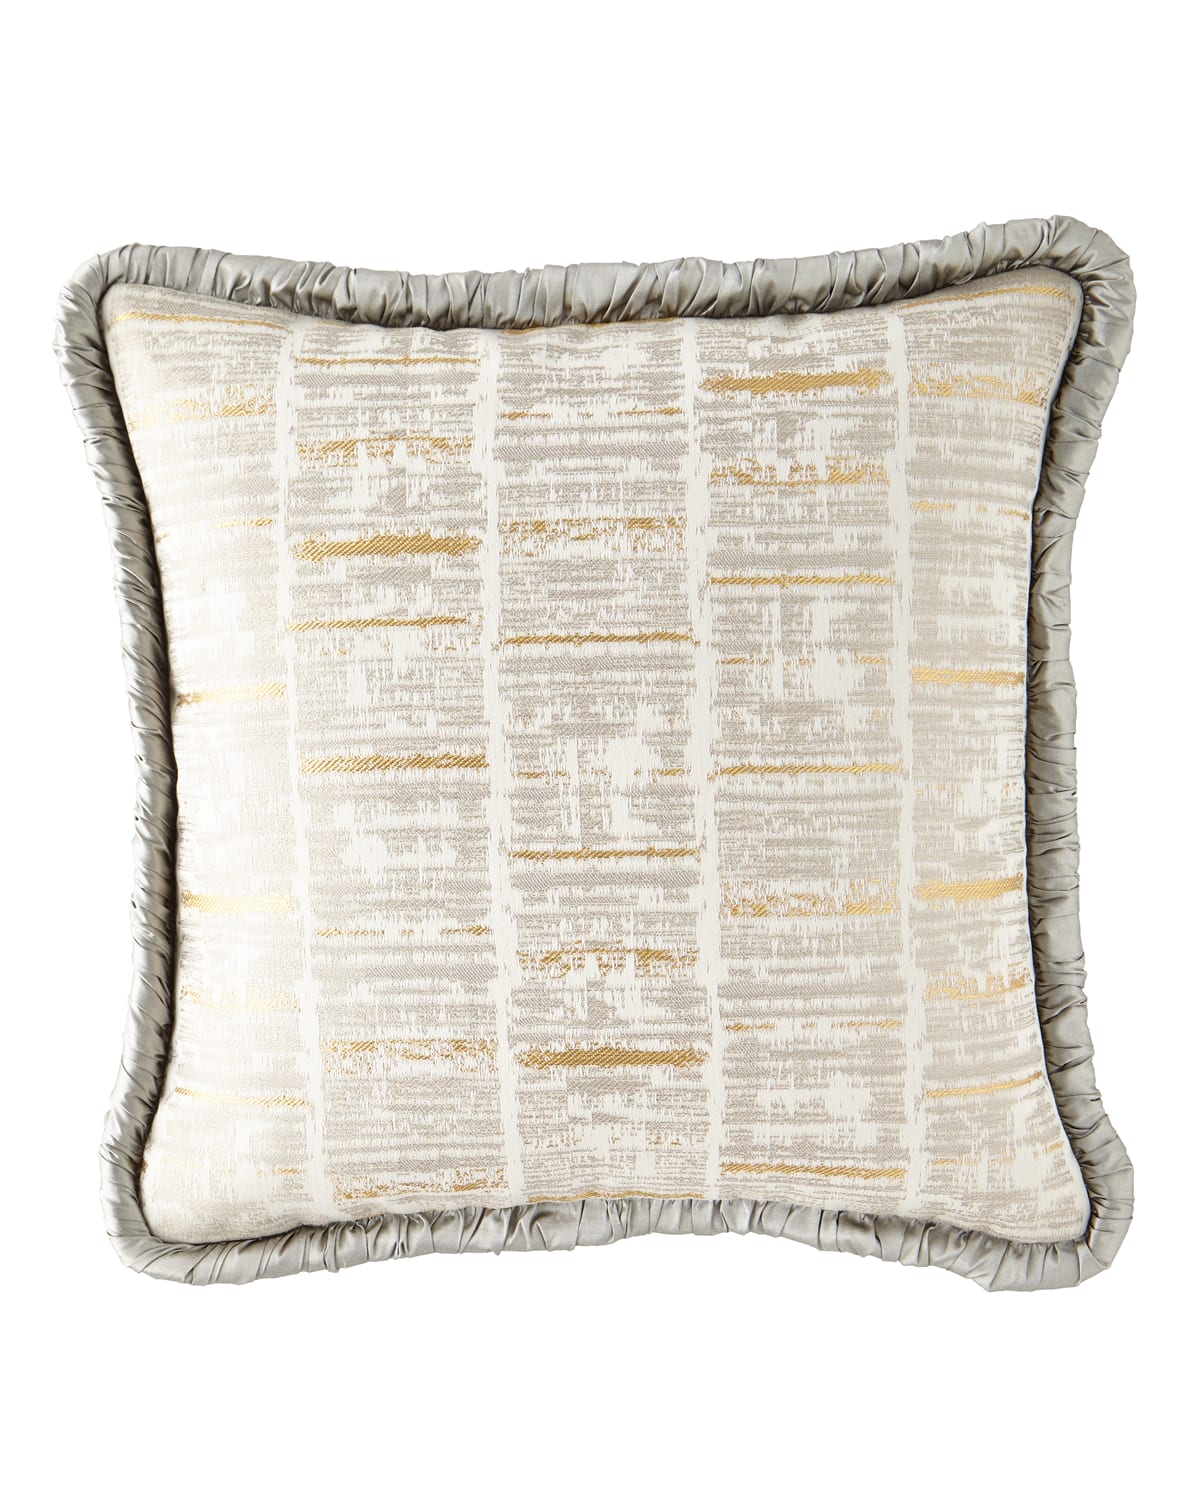 Image Dian Austin Couture Home Rialto Linear Boutique Pillow with Piping